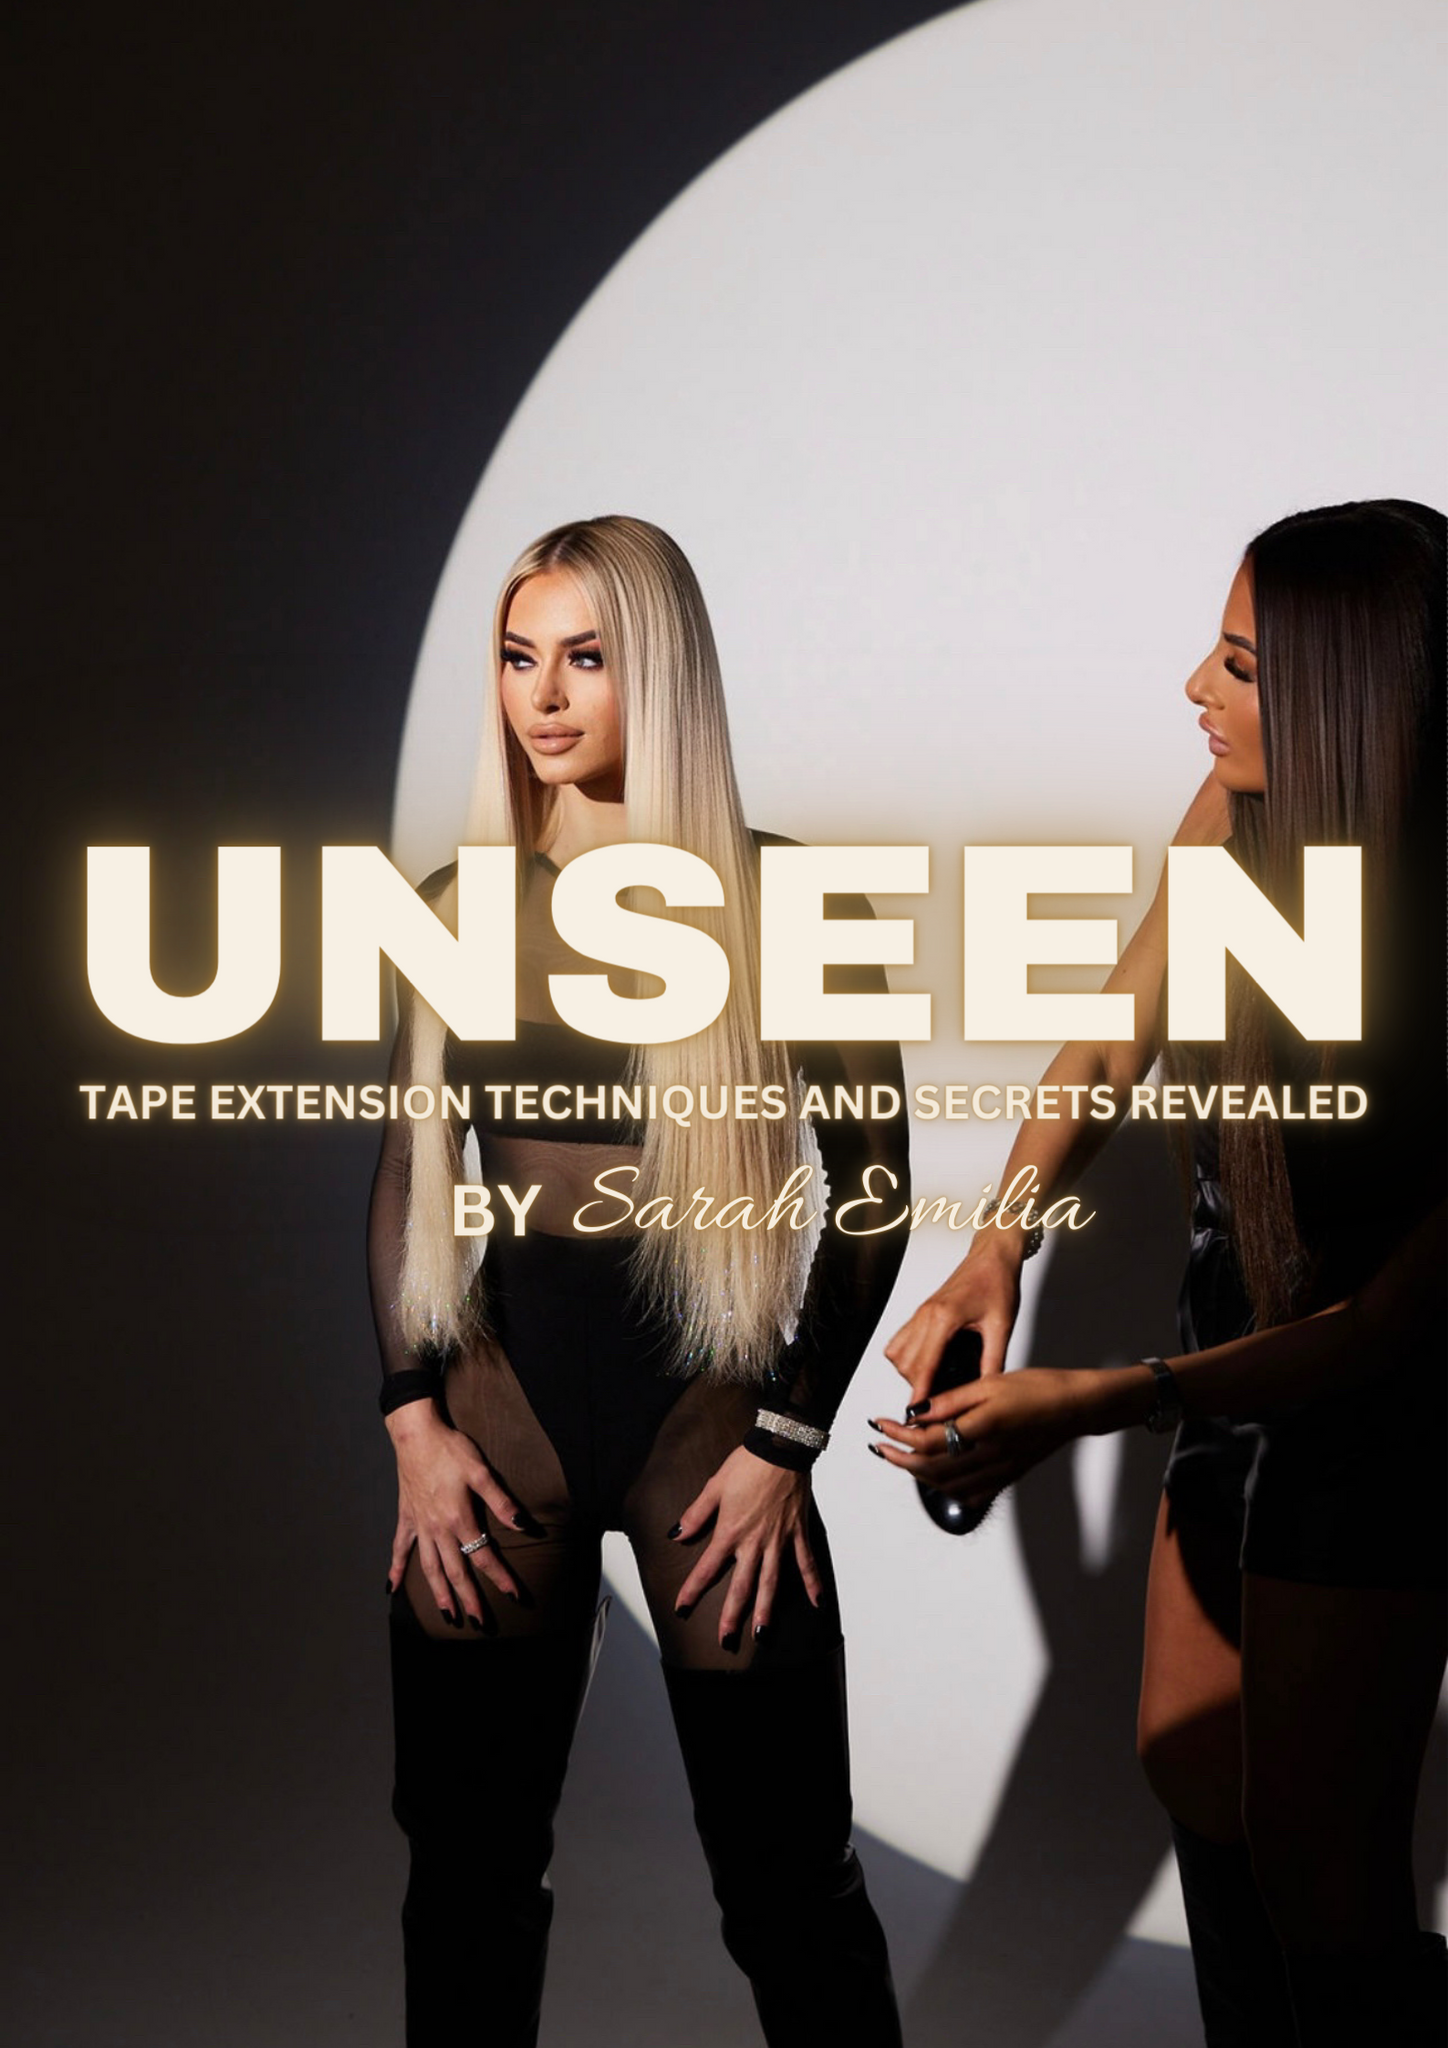 UNSEEN- Tape extension techniques and secrets revealed. By Sarah Emilia